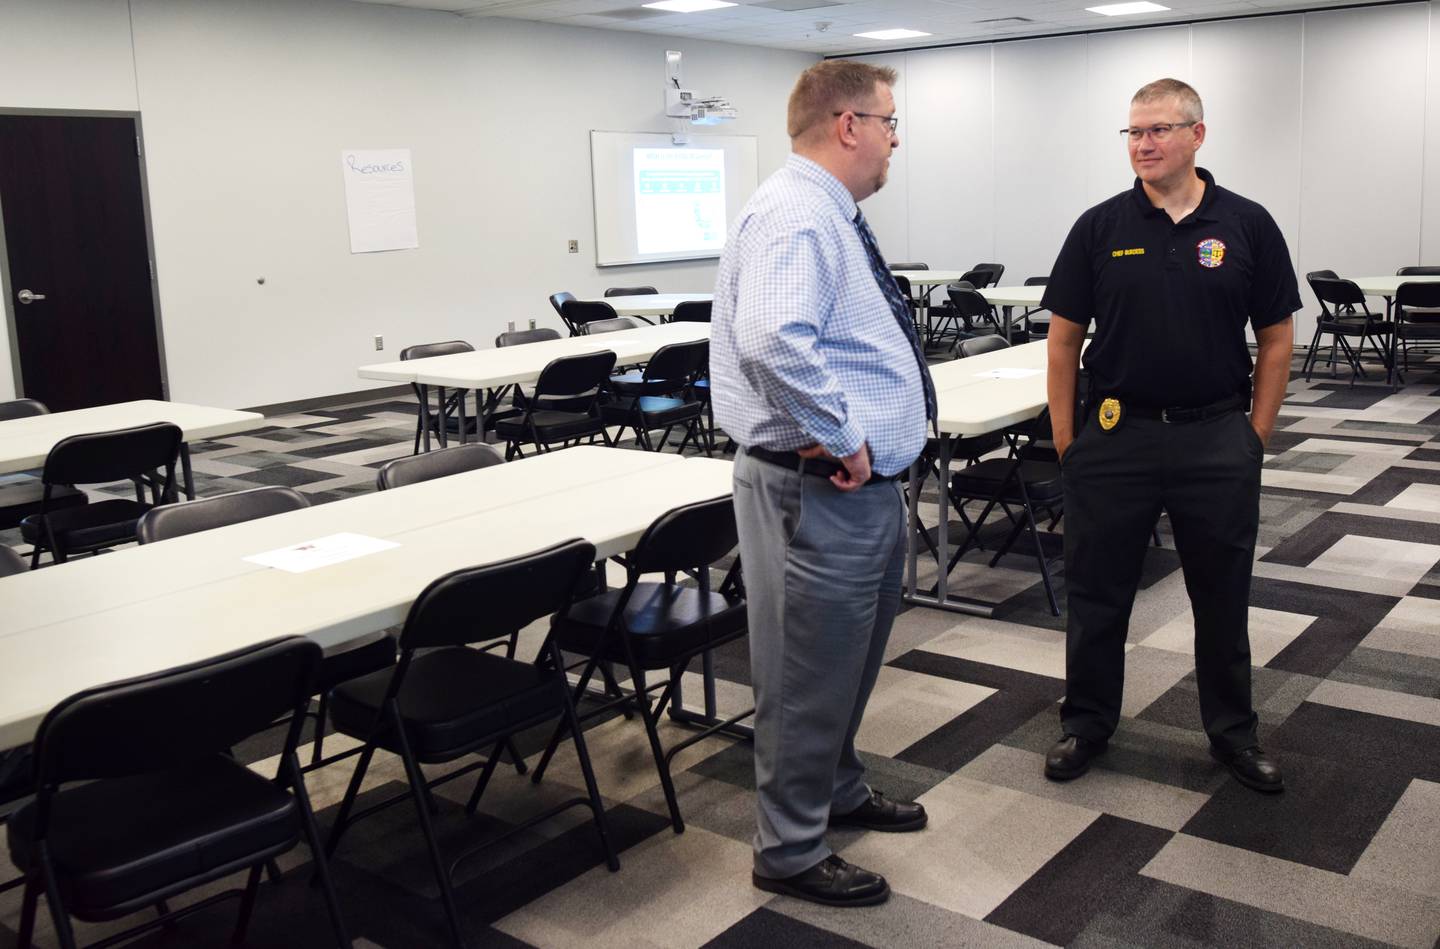 Left to right: Newton Superintendent Tom Messinger and Newton Police Chief Rob Burdess chat before guests arrive at the threat assessment training session June 9 at the center of administration EJH Beard.